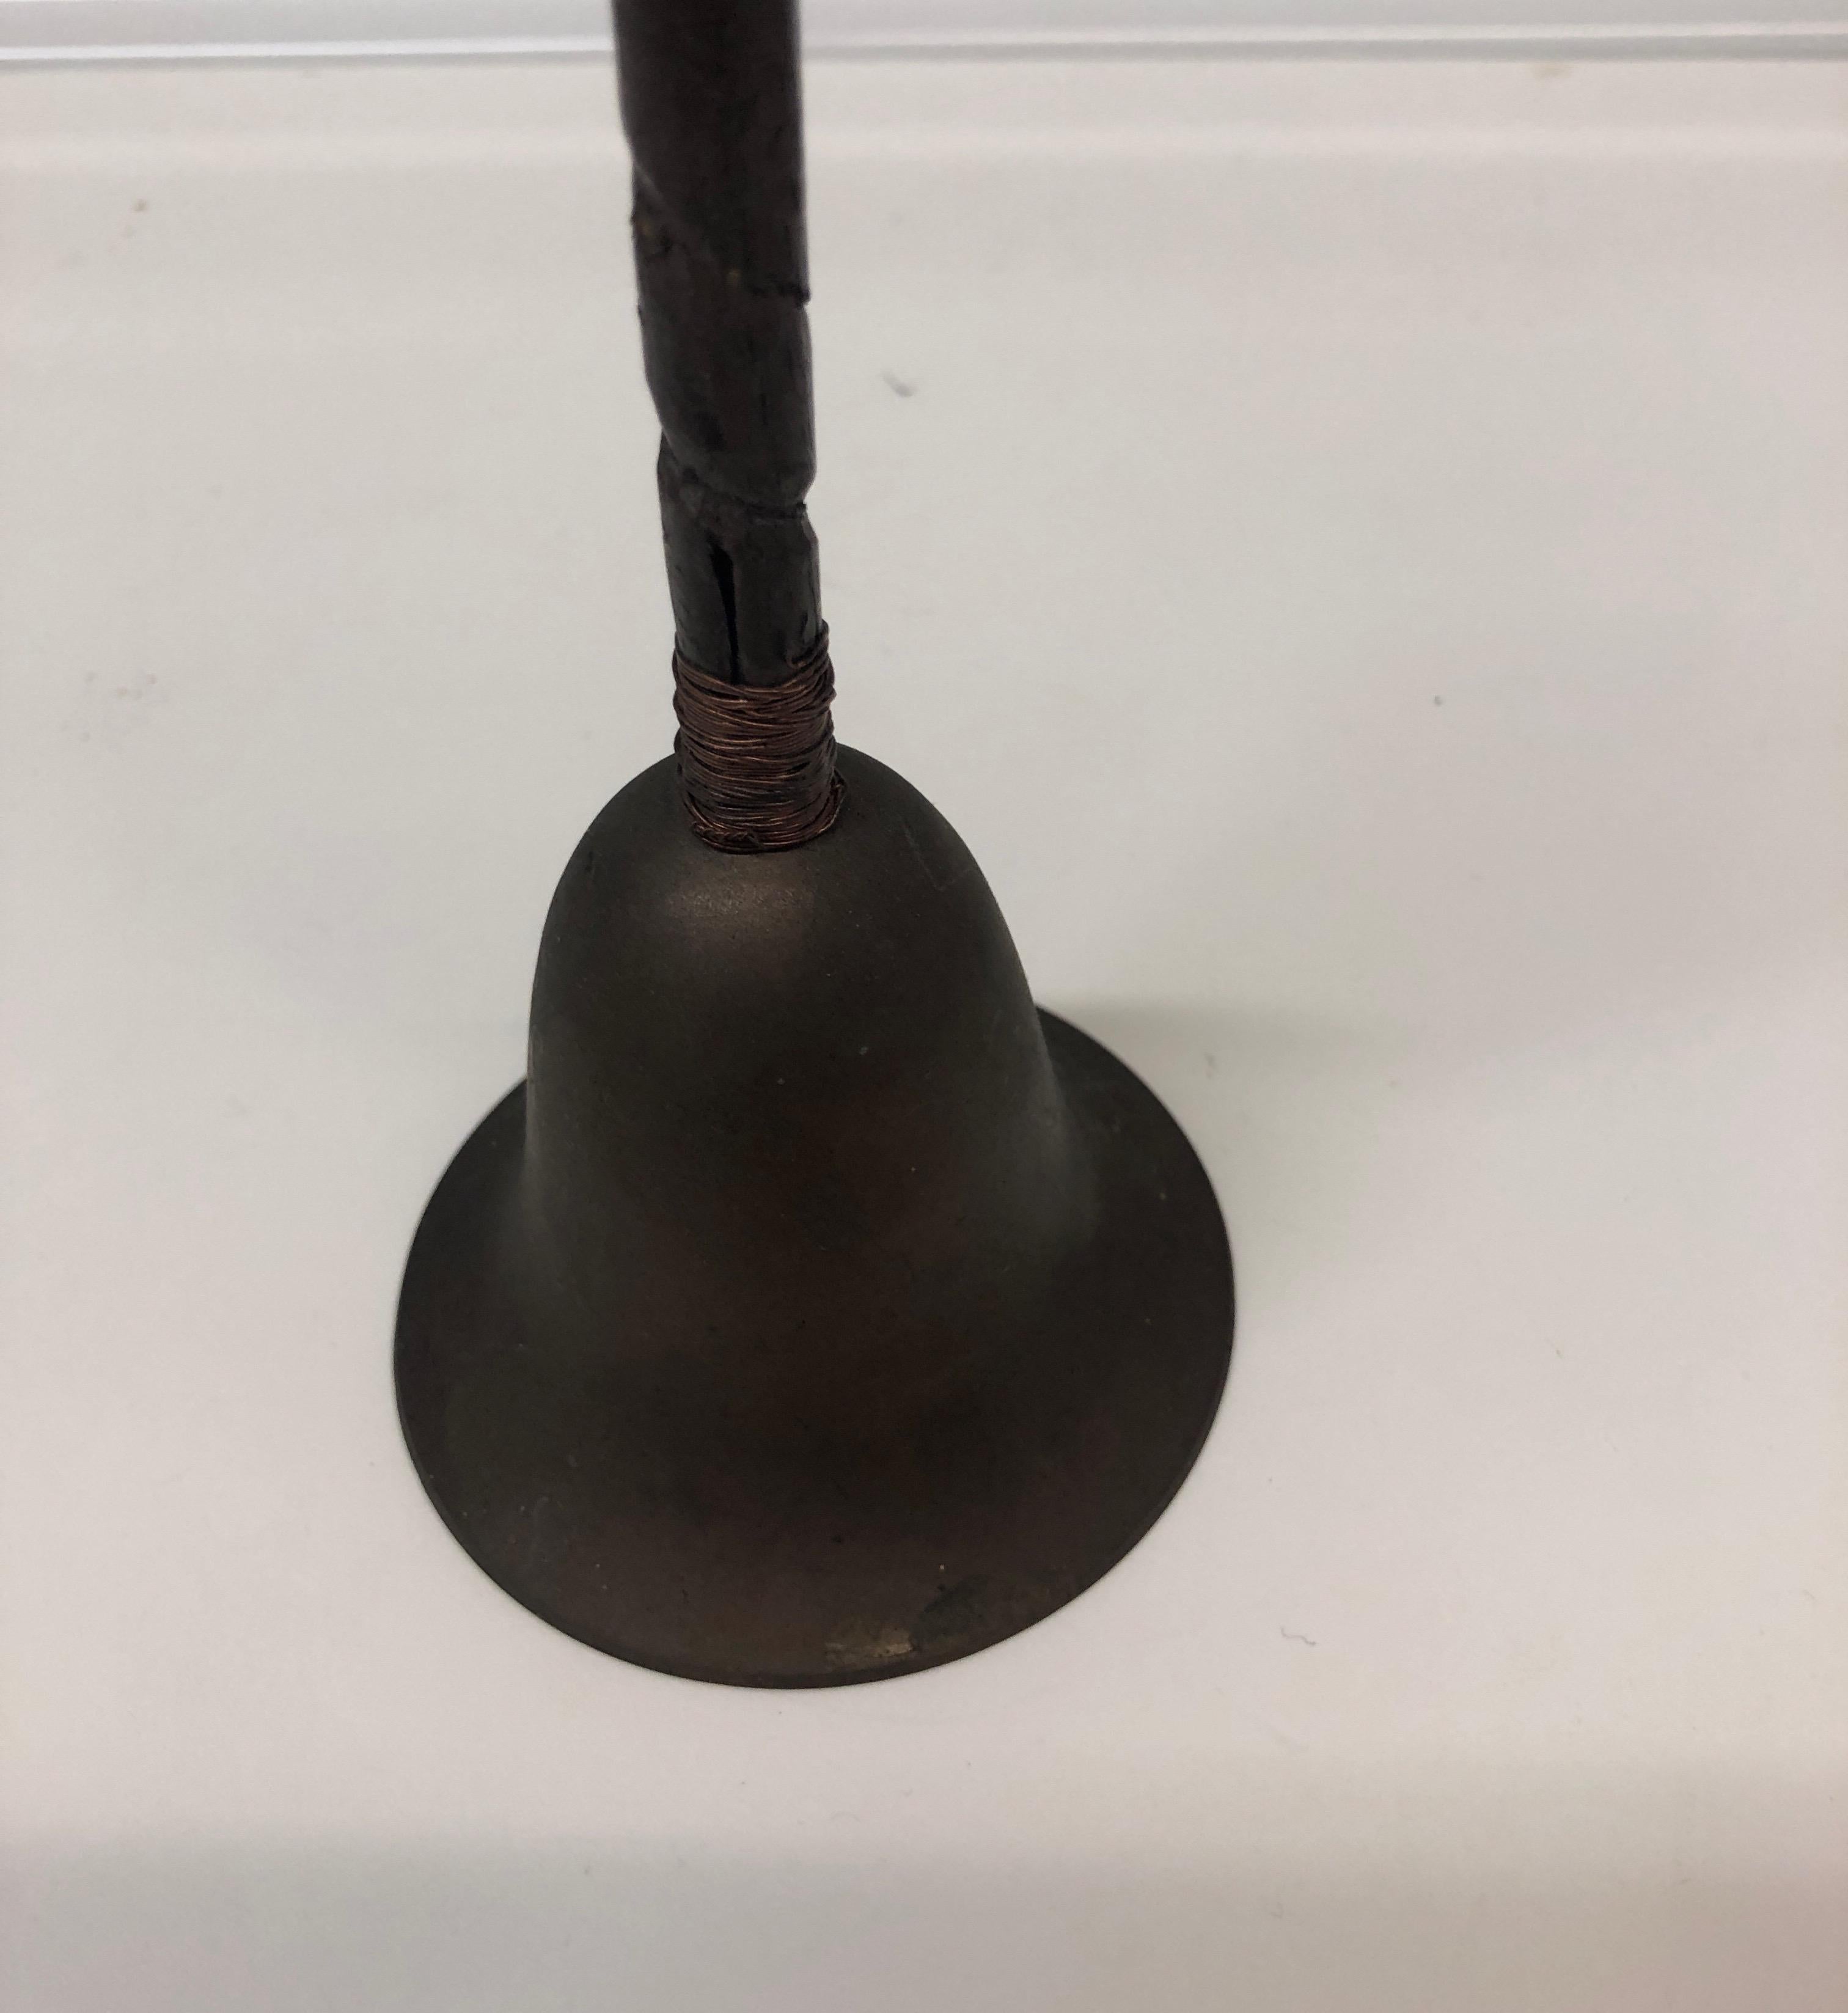 Vintage Indian brass and wood bell.
Size: 3” D x9” H.